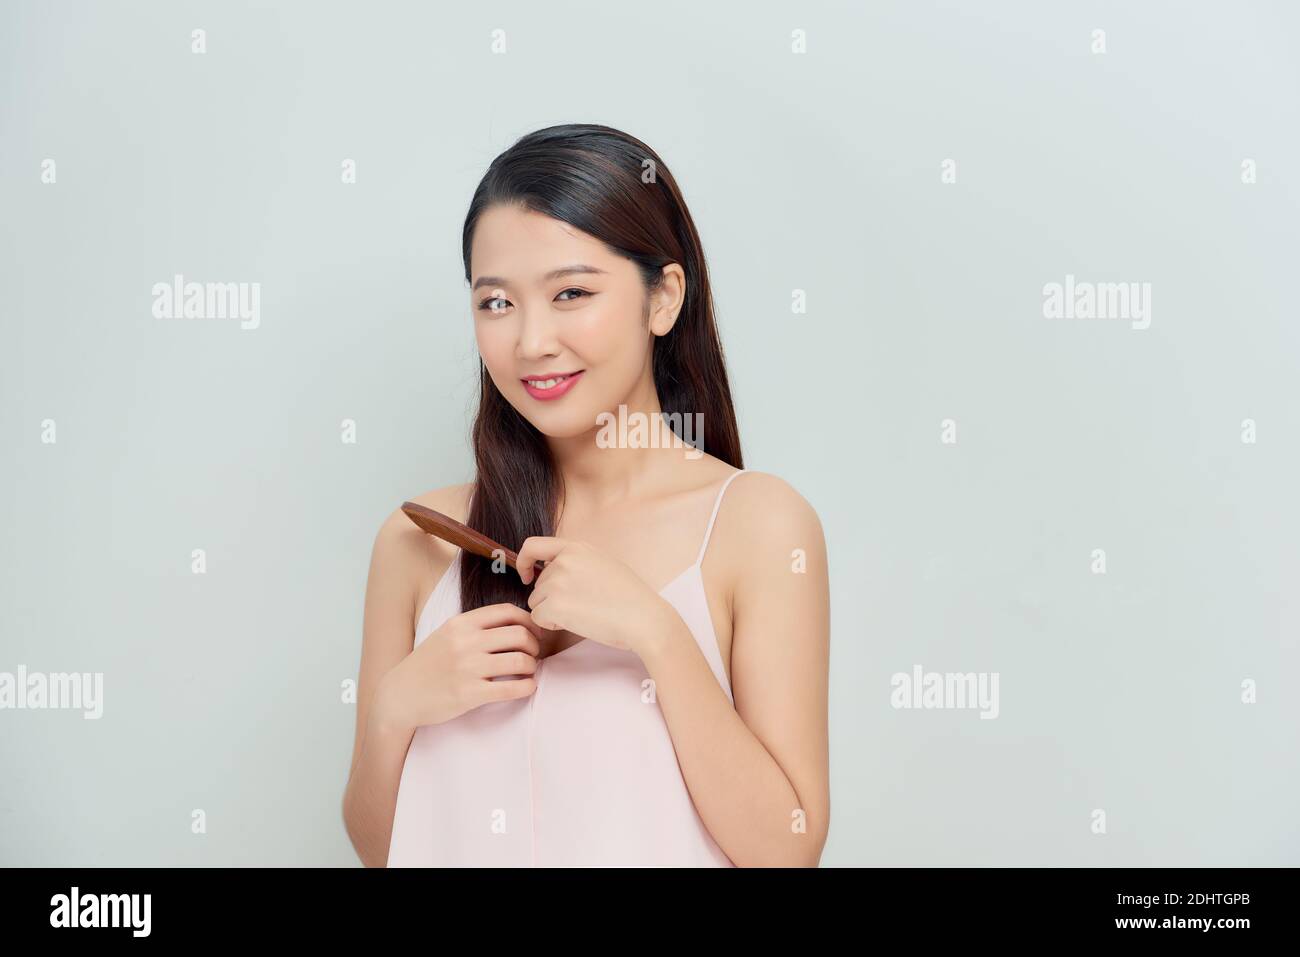 Portrait of cute young woman on white background combing hair. Stock Photo